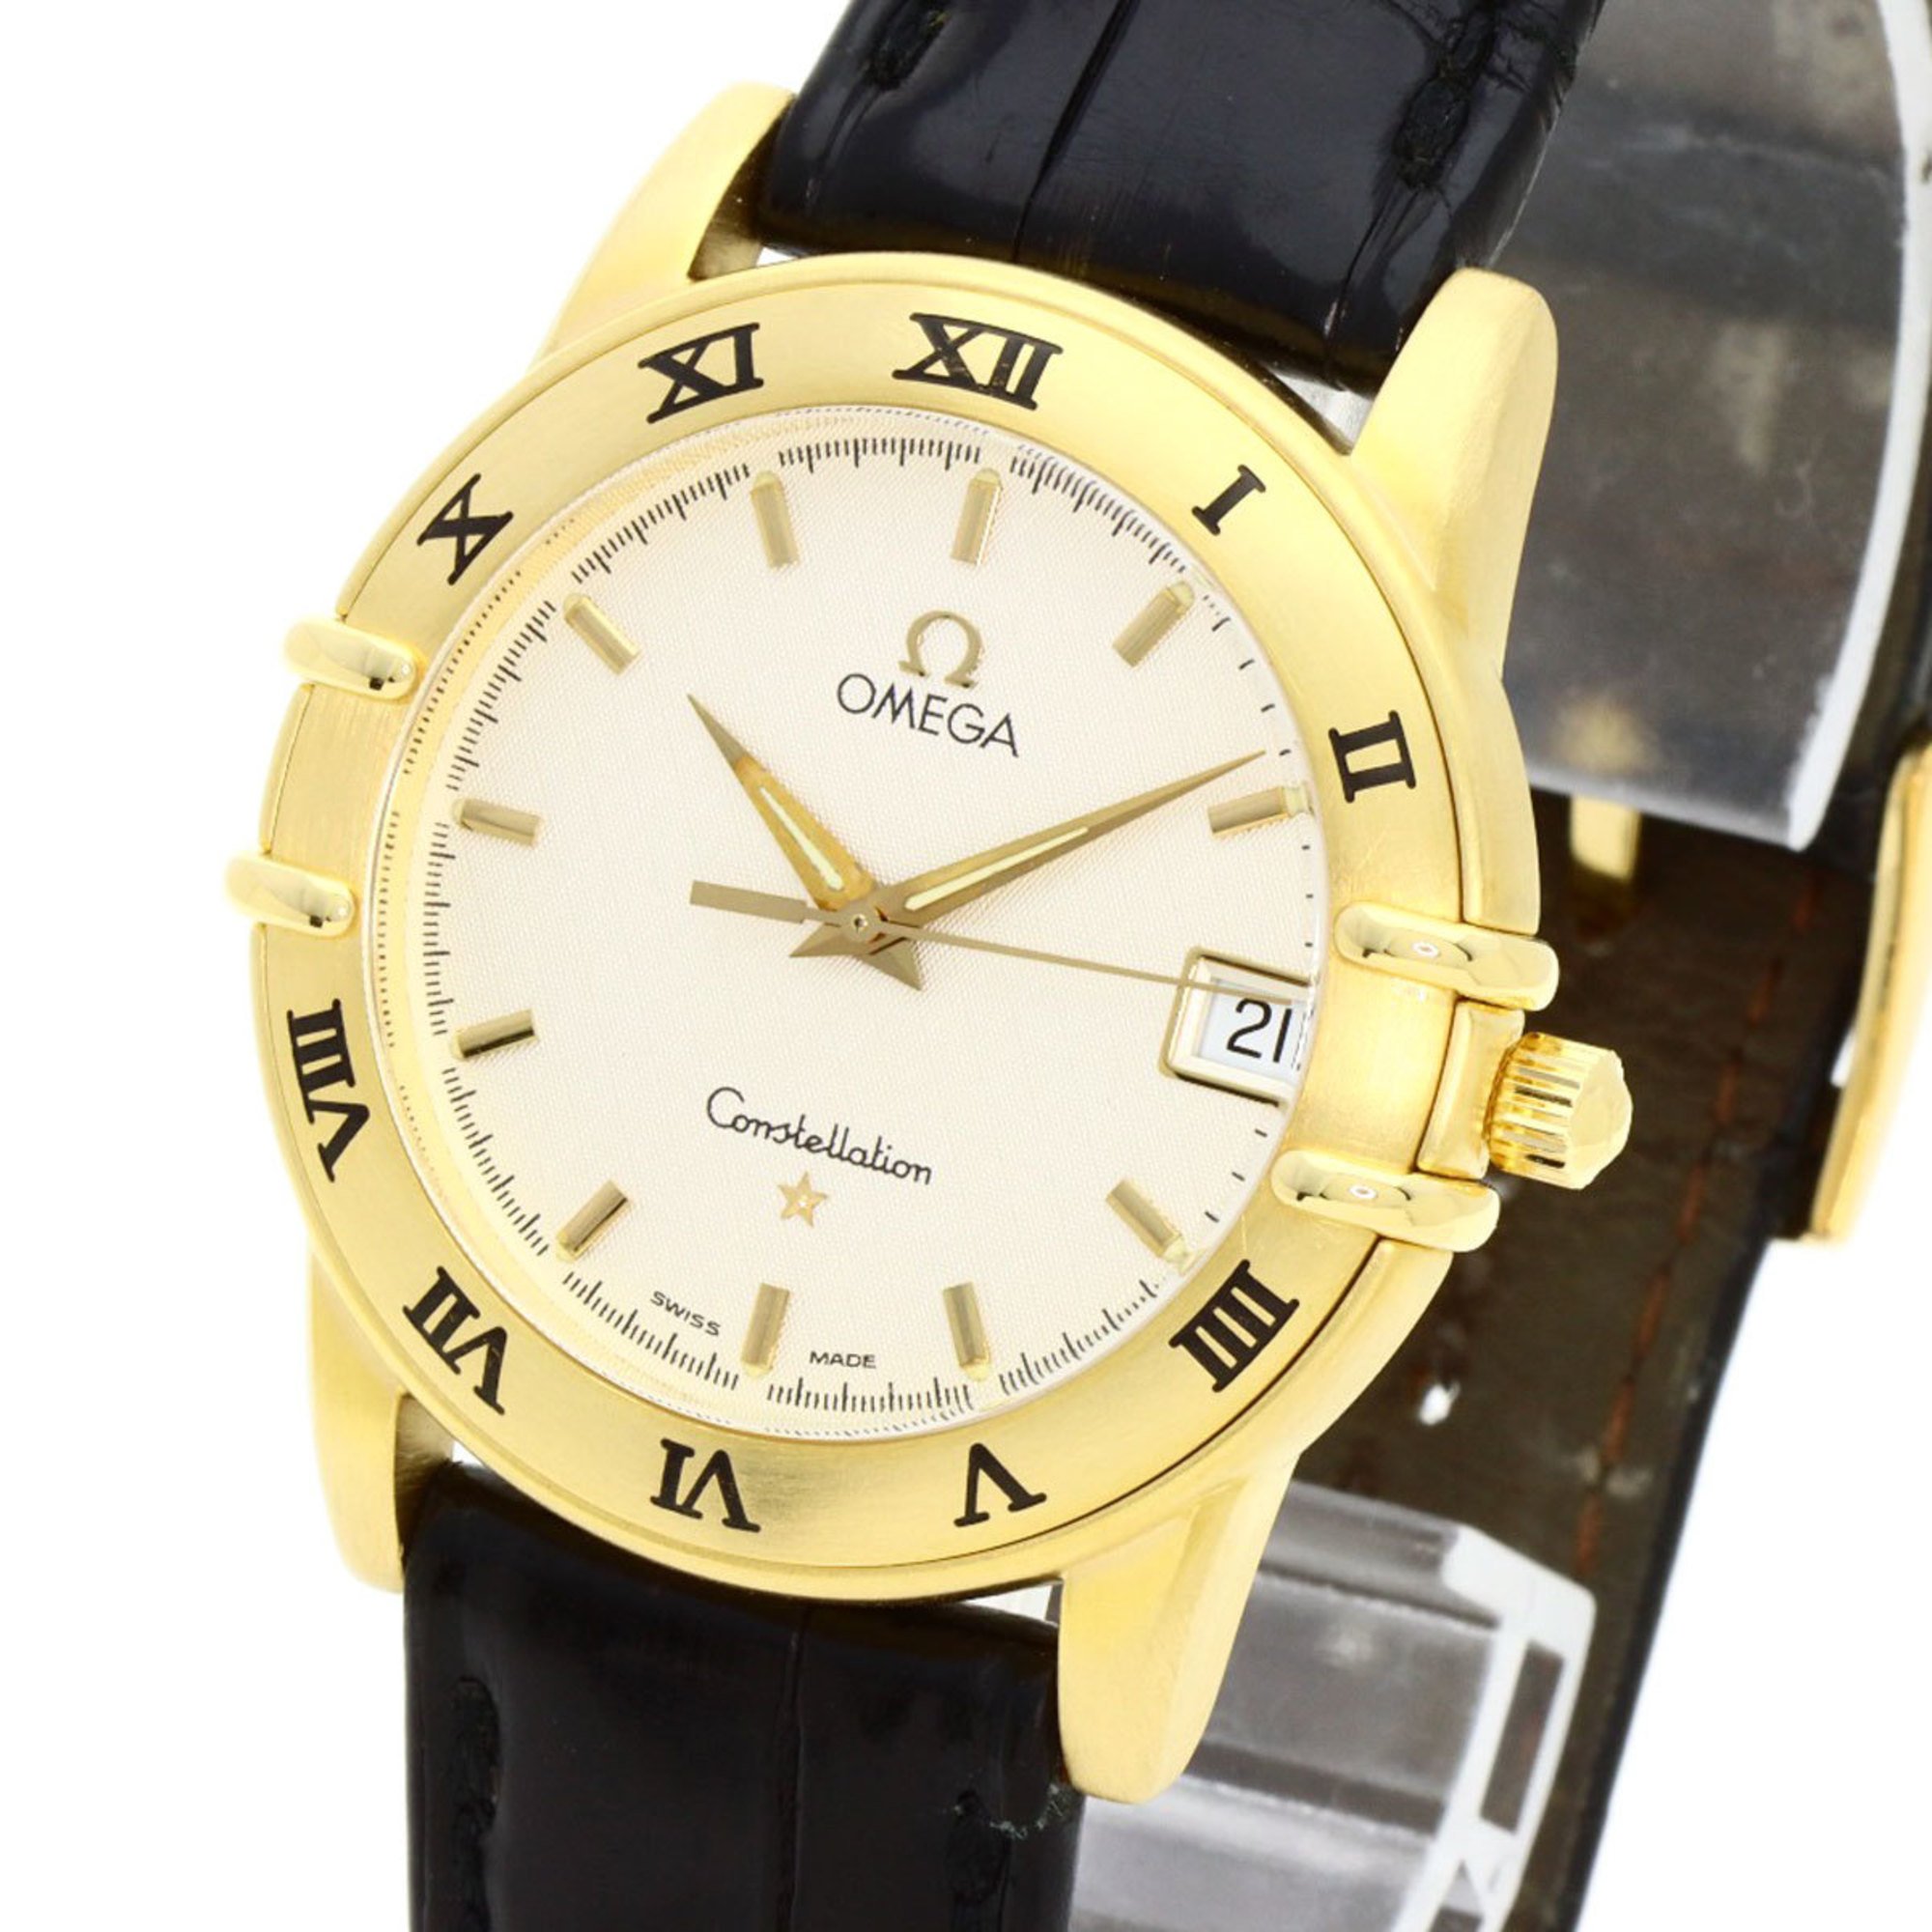 Omega 1612.10 Constellation Watch, 18K Yellow Gold, Leather, Men's